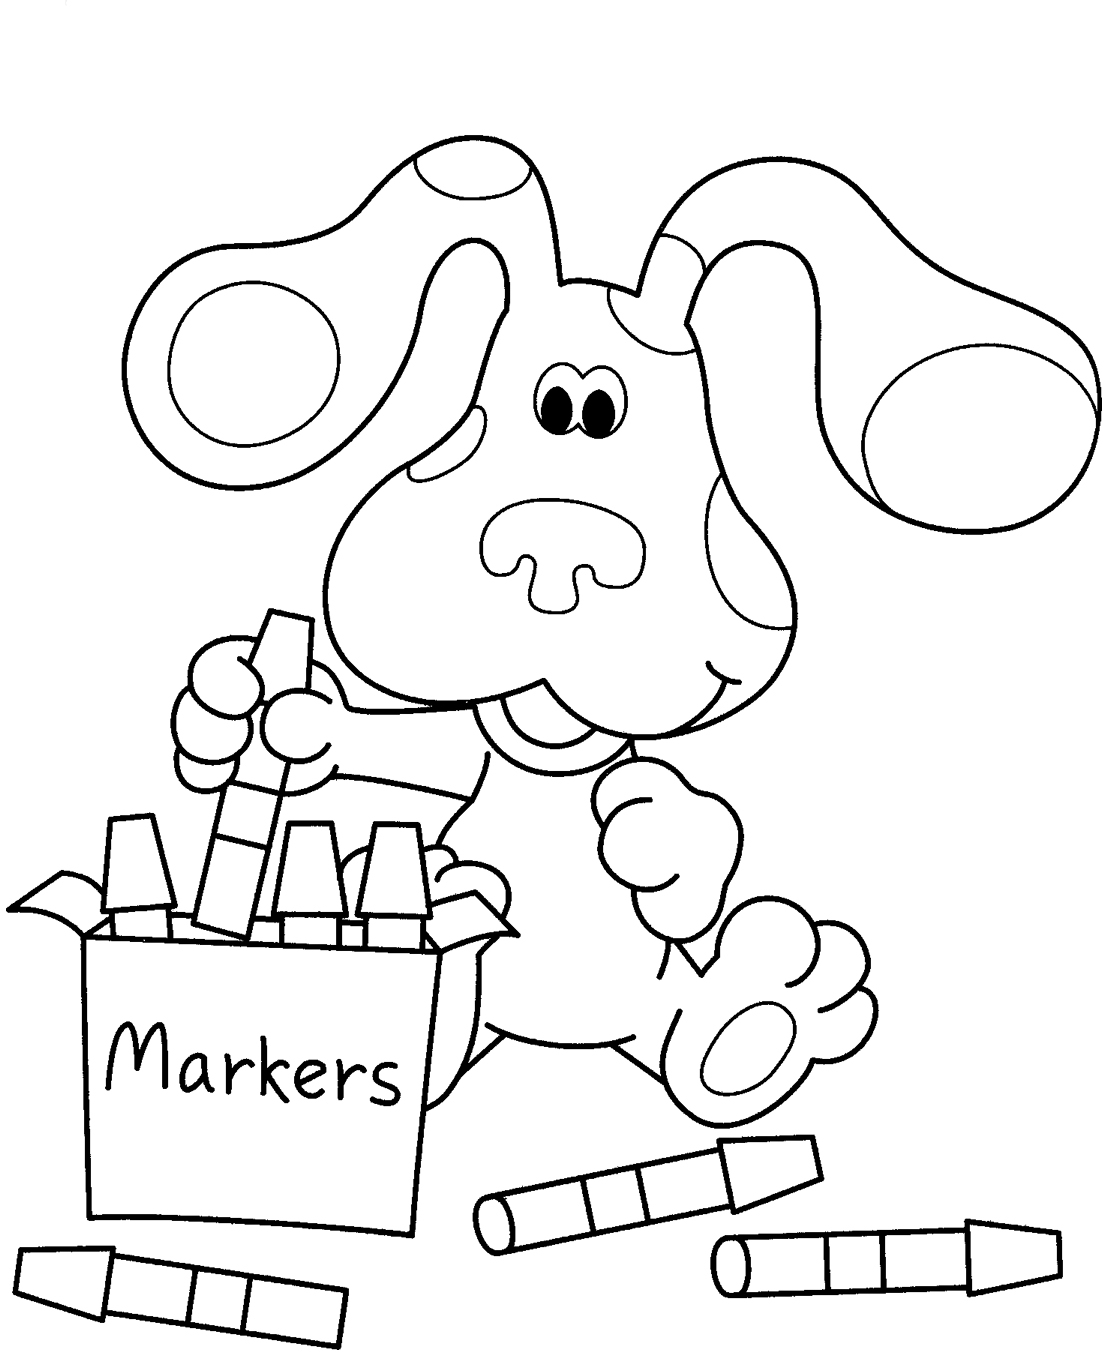 Nick Jr Coloring Pages 14 Coloring Kids